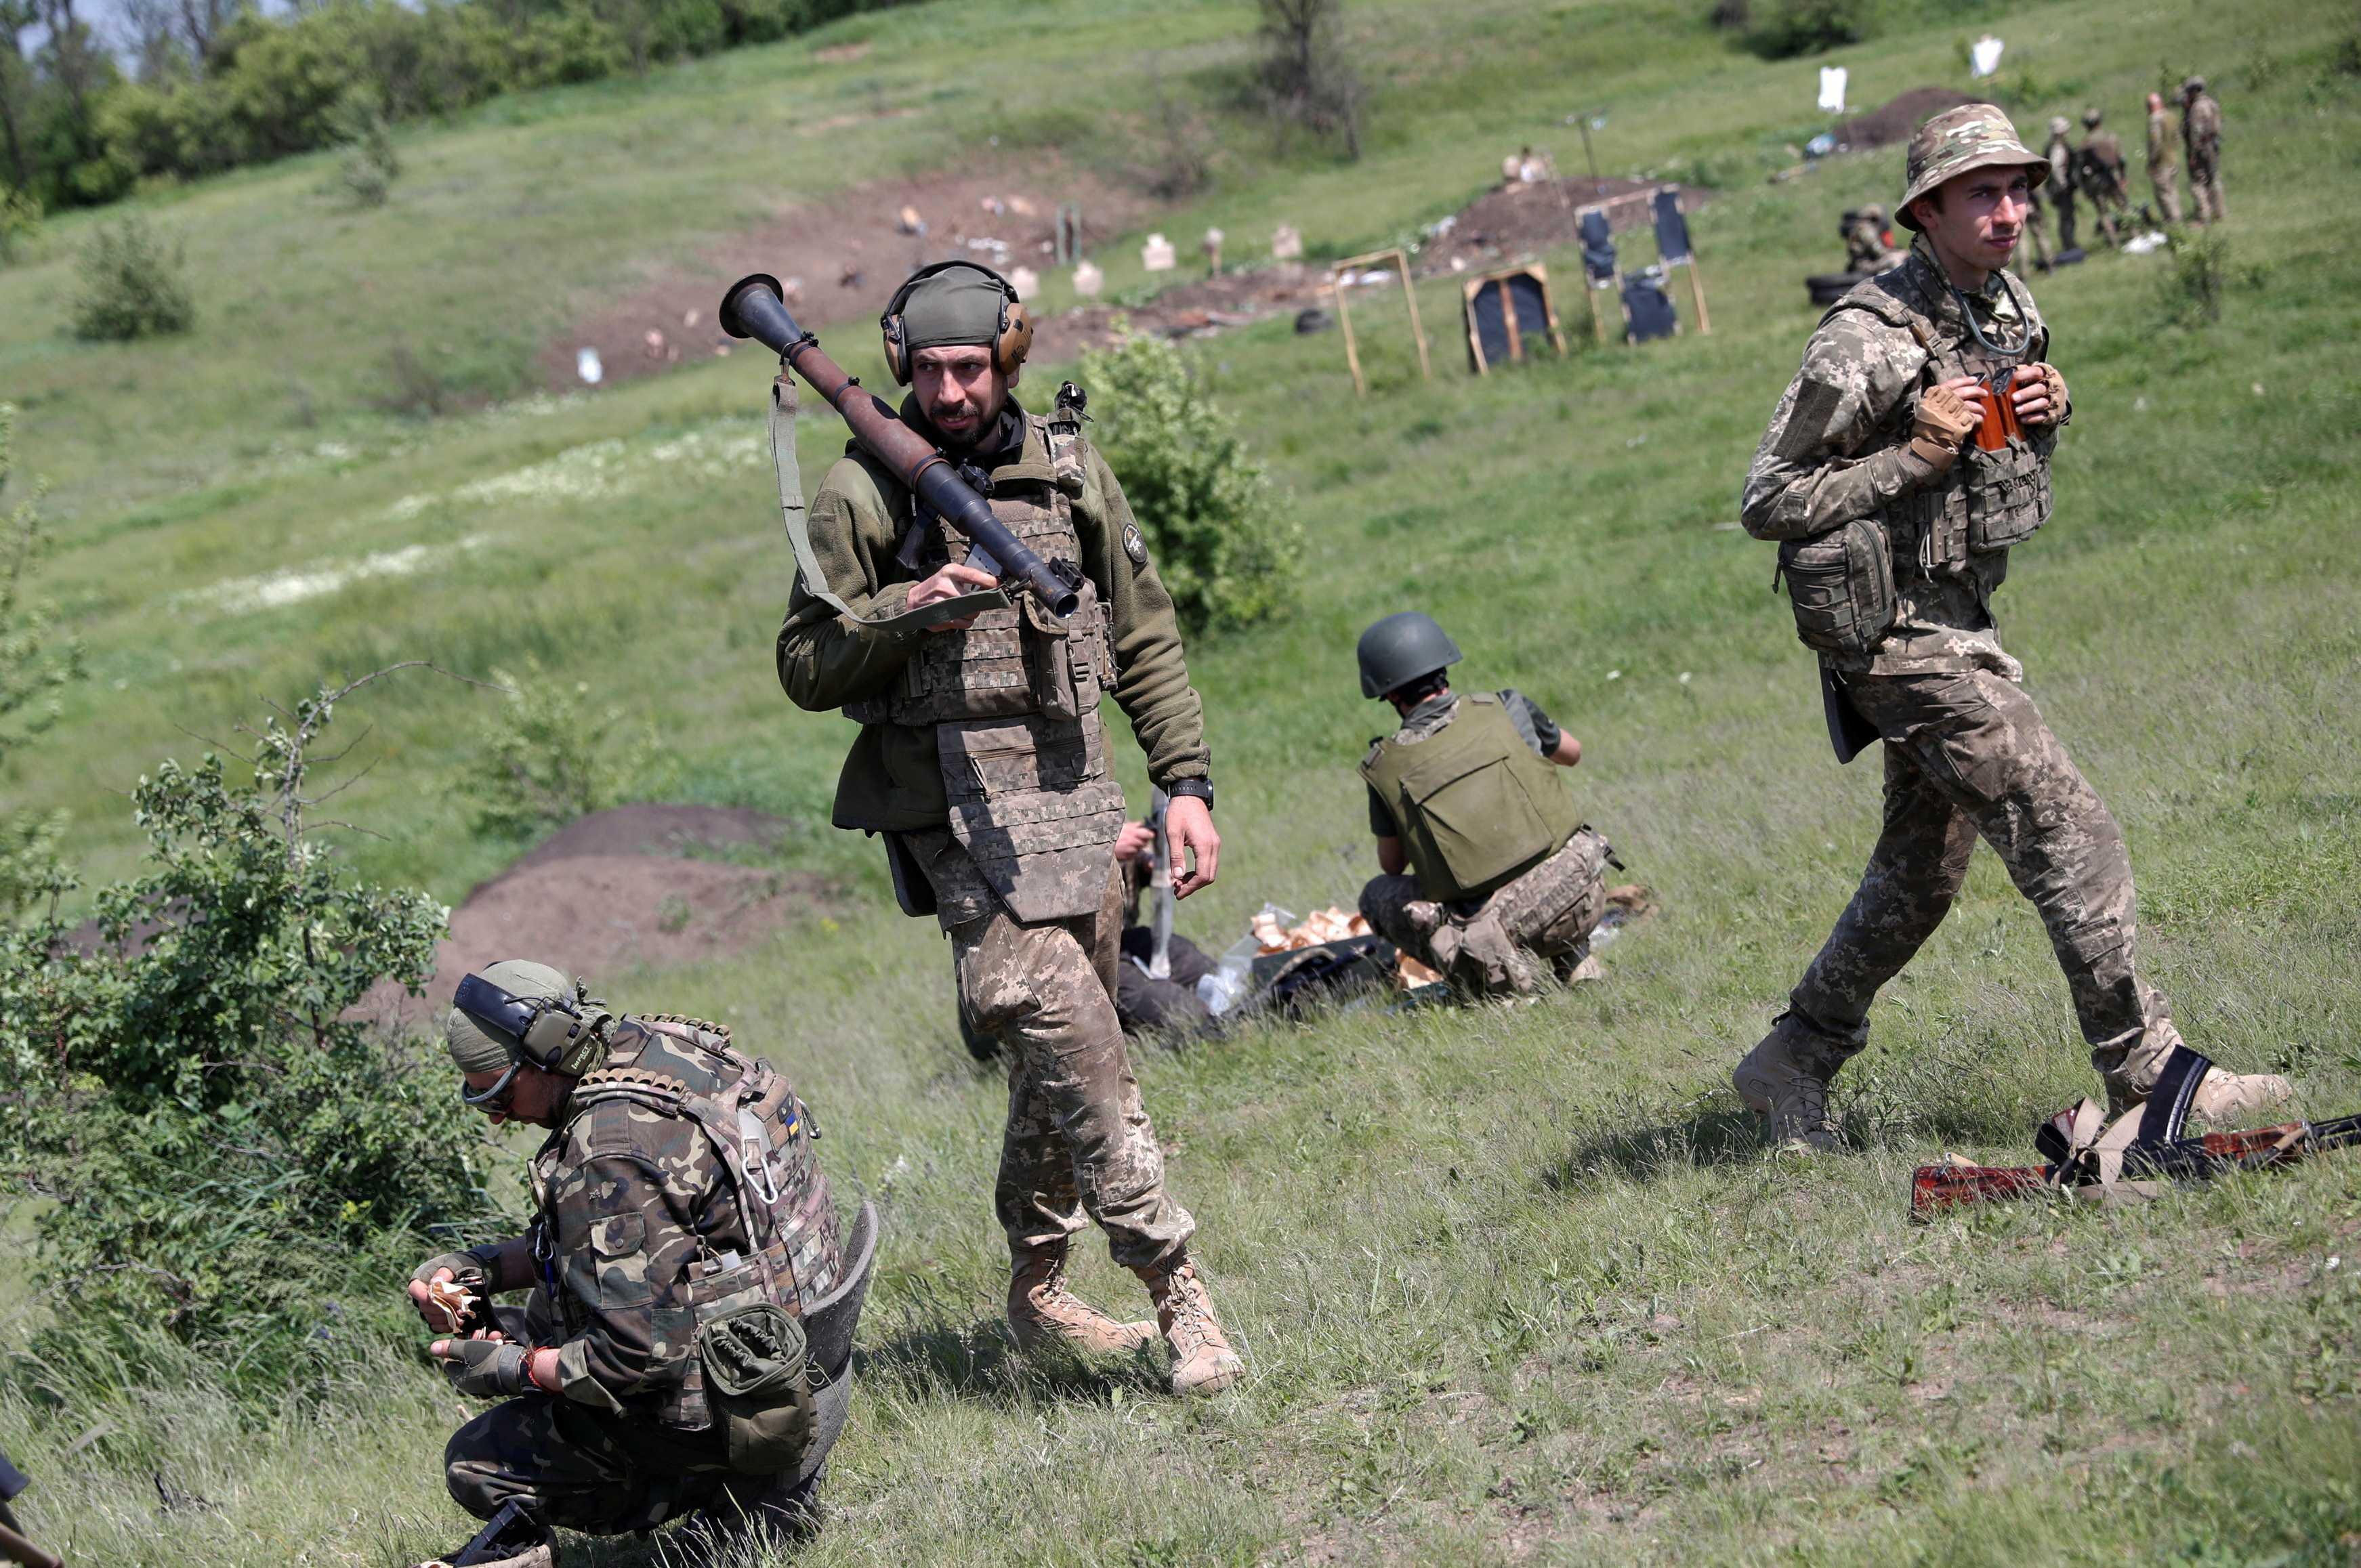 Ukrainian servicemen of the 128th territorial defence brigade attend a military training, amid Russia's attack on Ukraine, in Donetsk region, Ukraine, May 18. Photo: Reuters